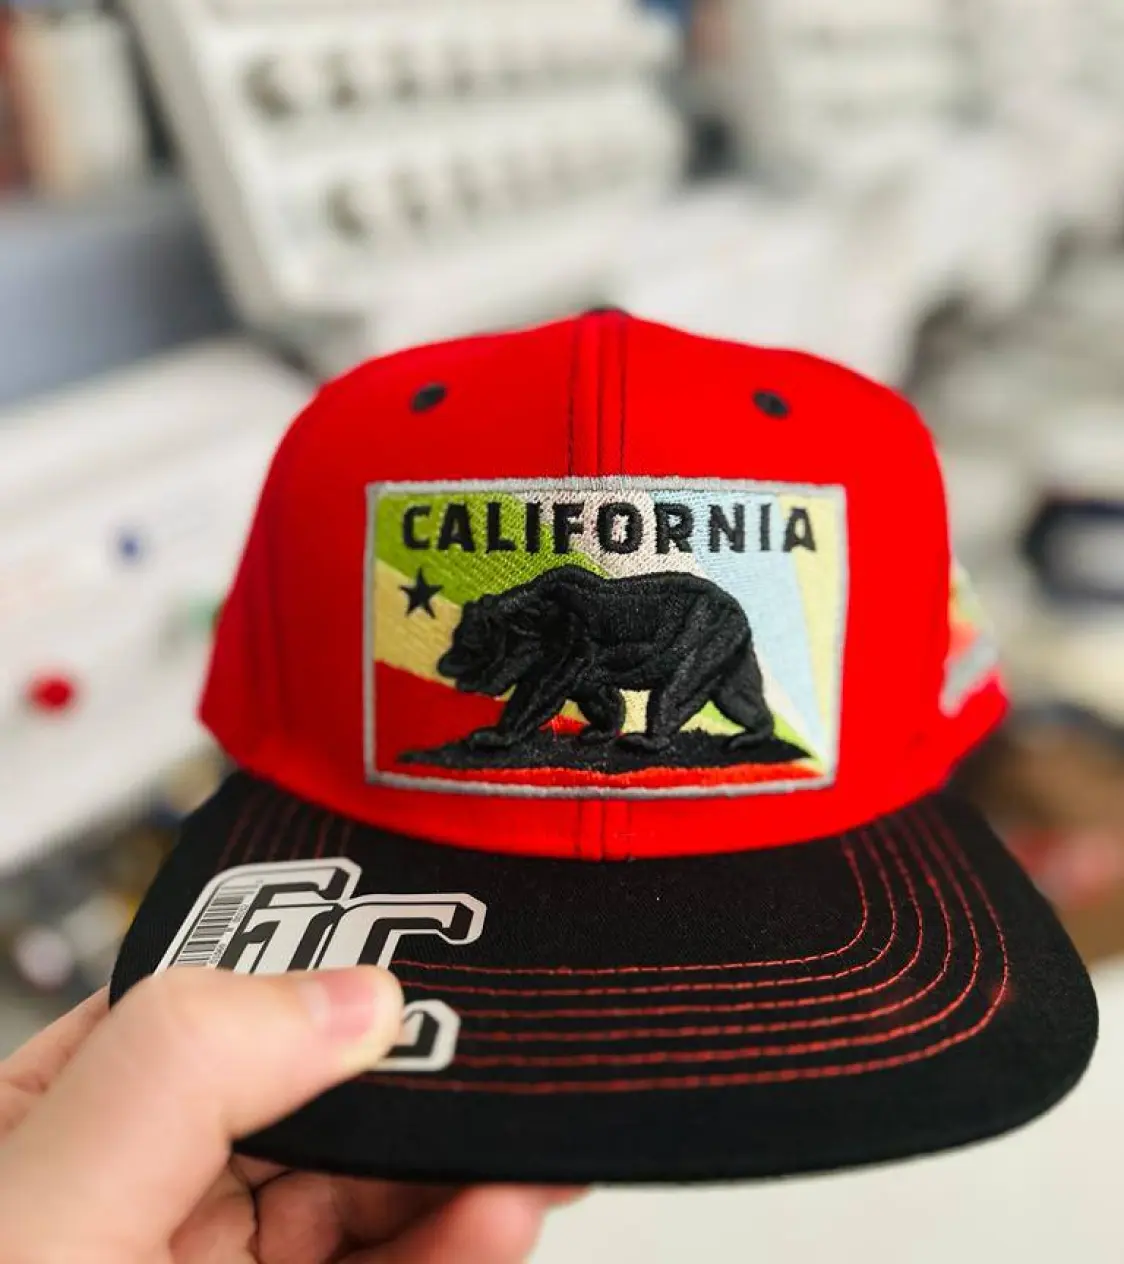 Red cap with California print